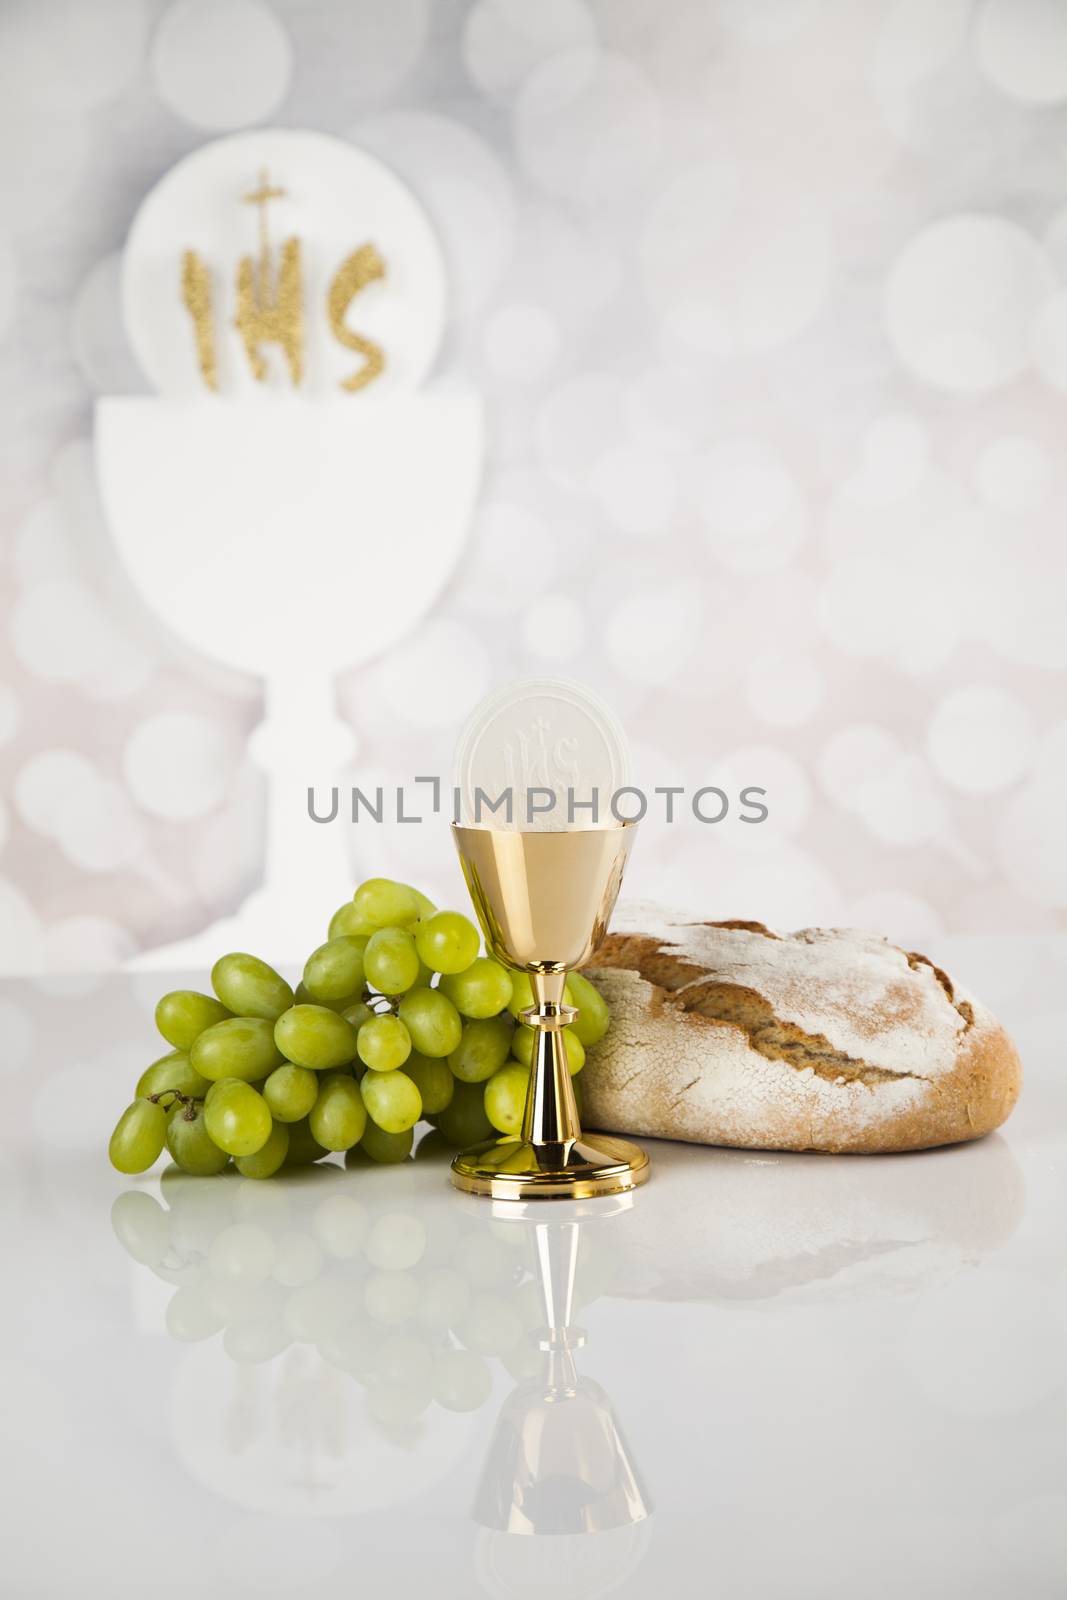 Holy communion a golden chalice, composition isolated on white by JanPietruszka